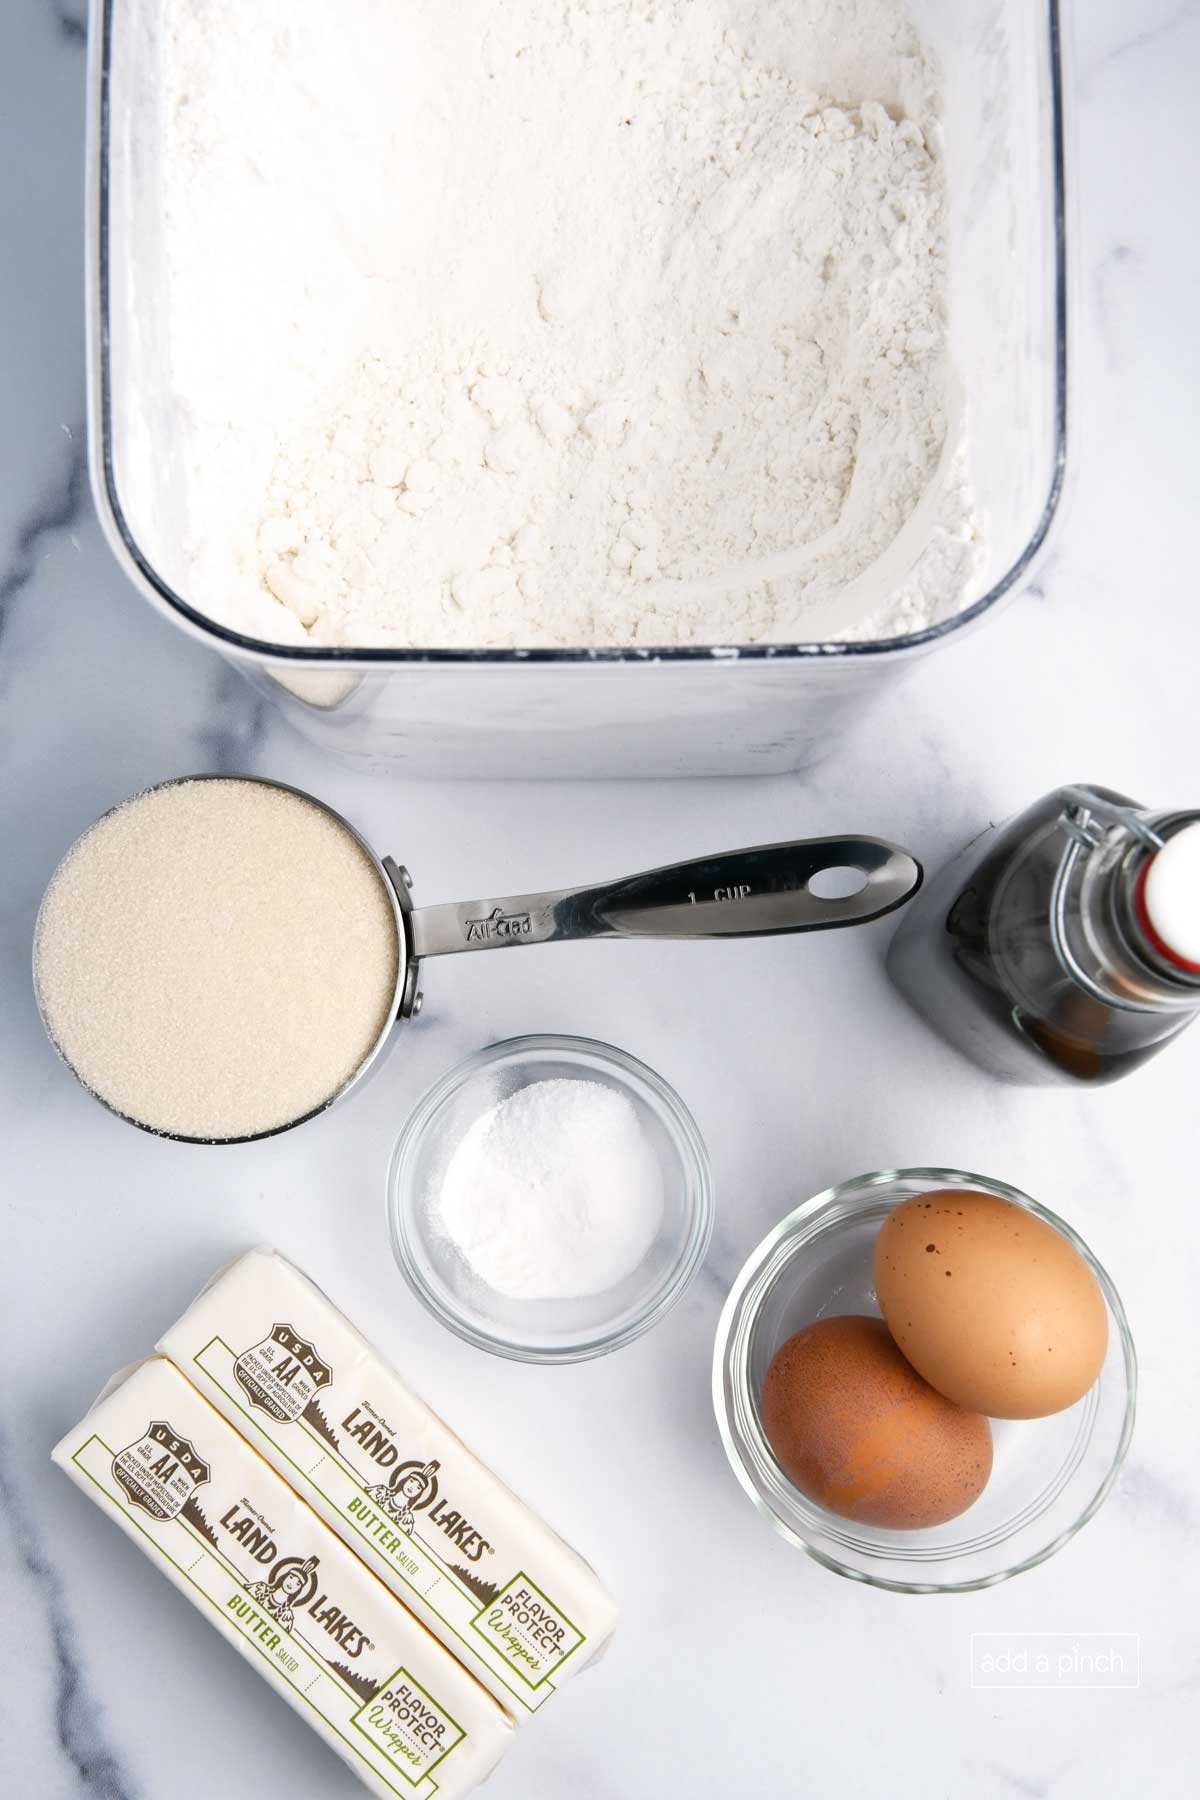 Photograph of ingredients used to make rolled sugar cookies: flour, sugar, vanilla extract, eggs, and butter.